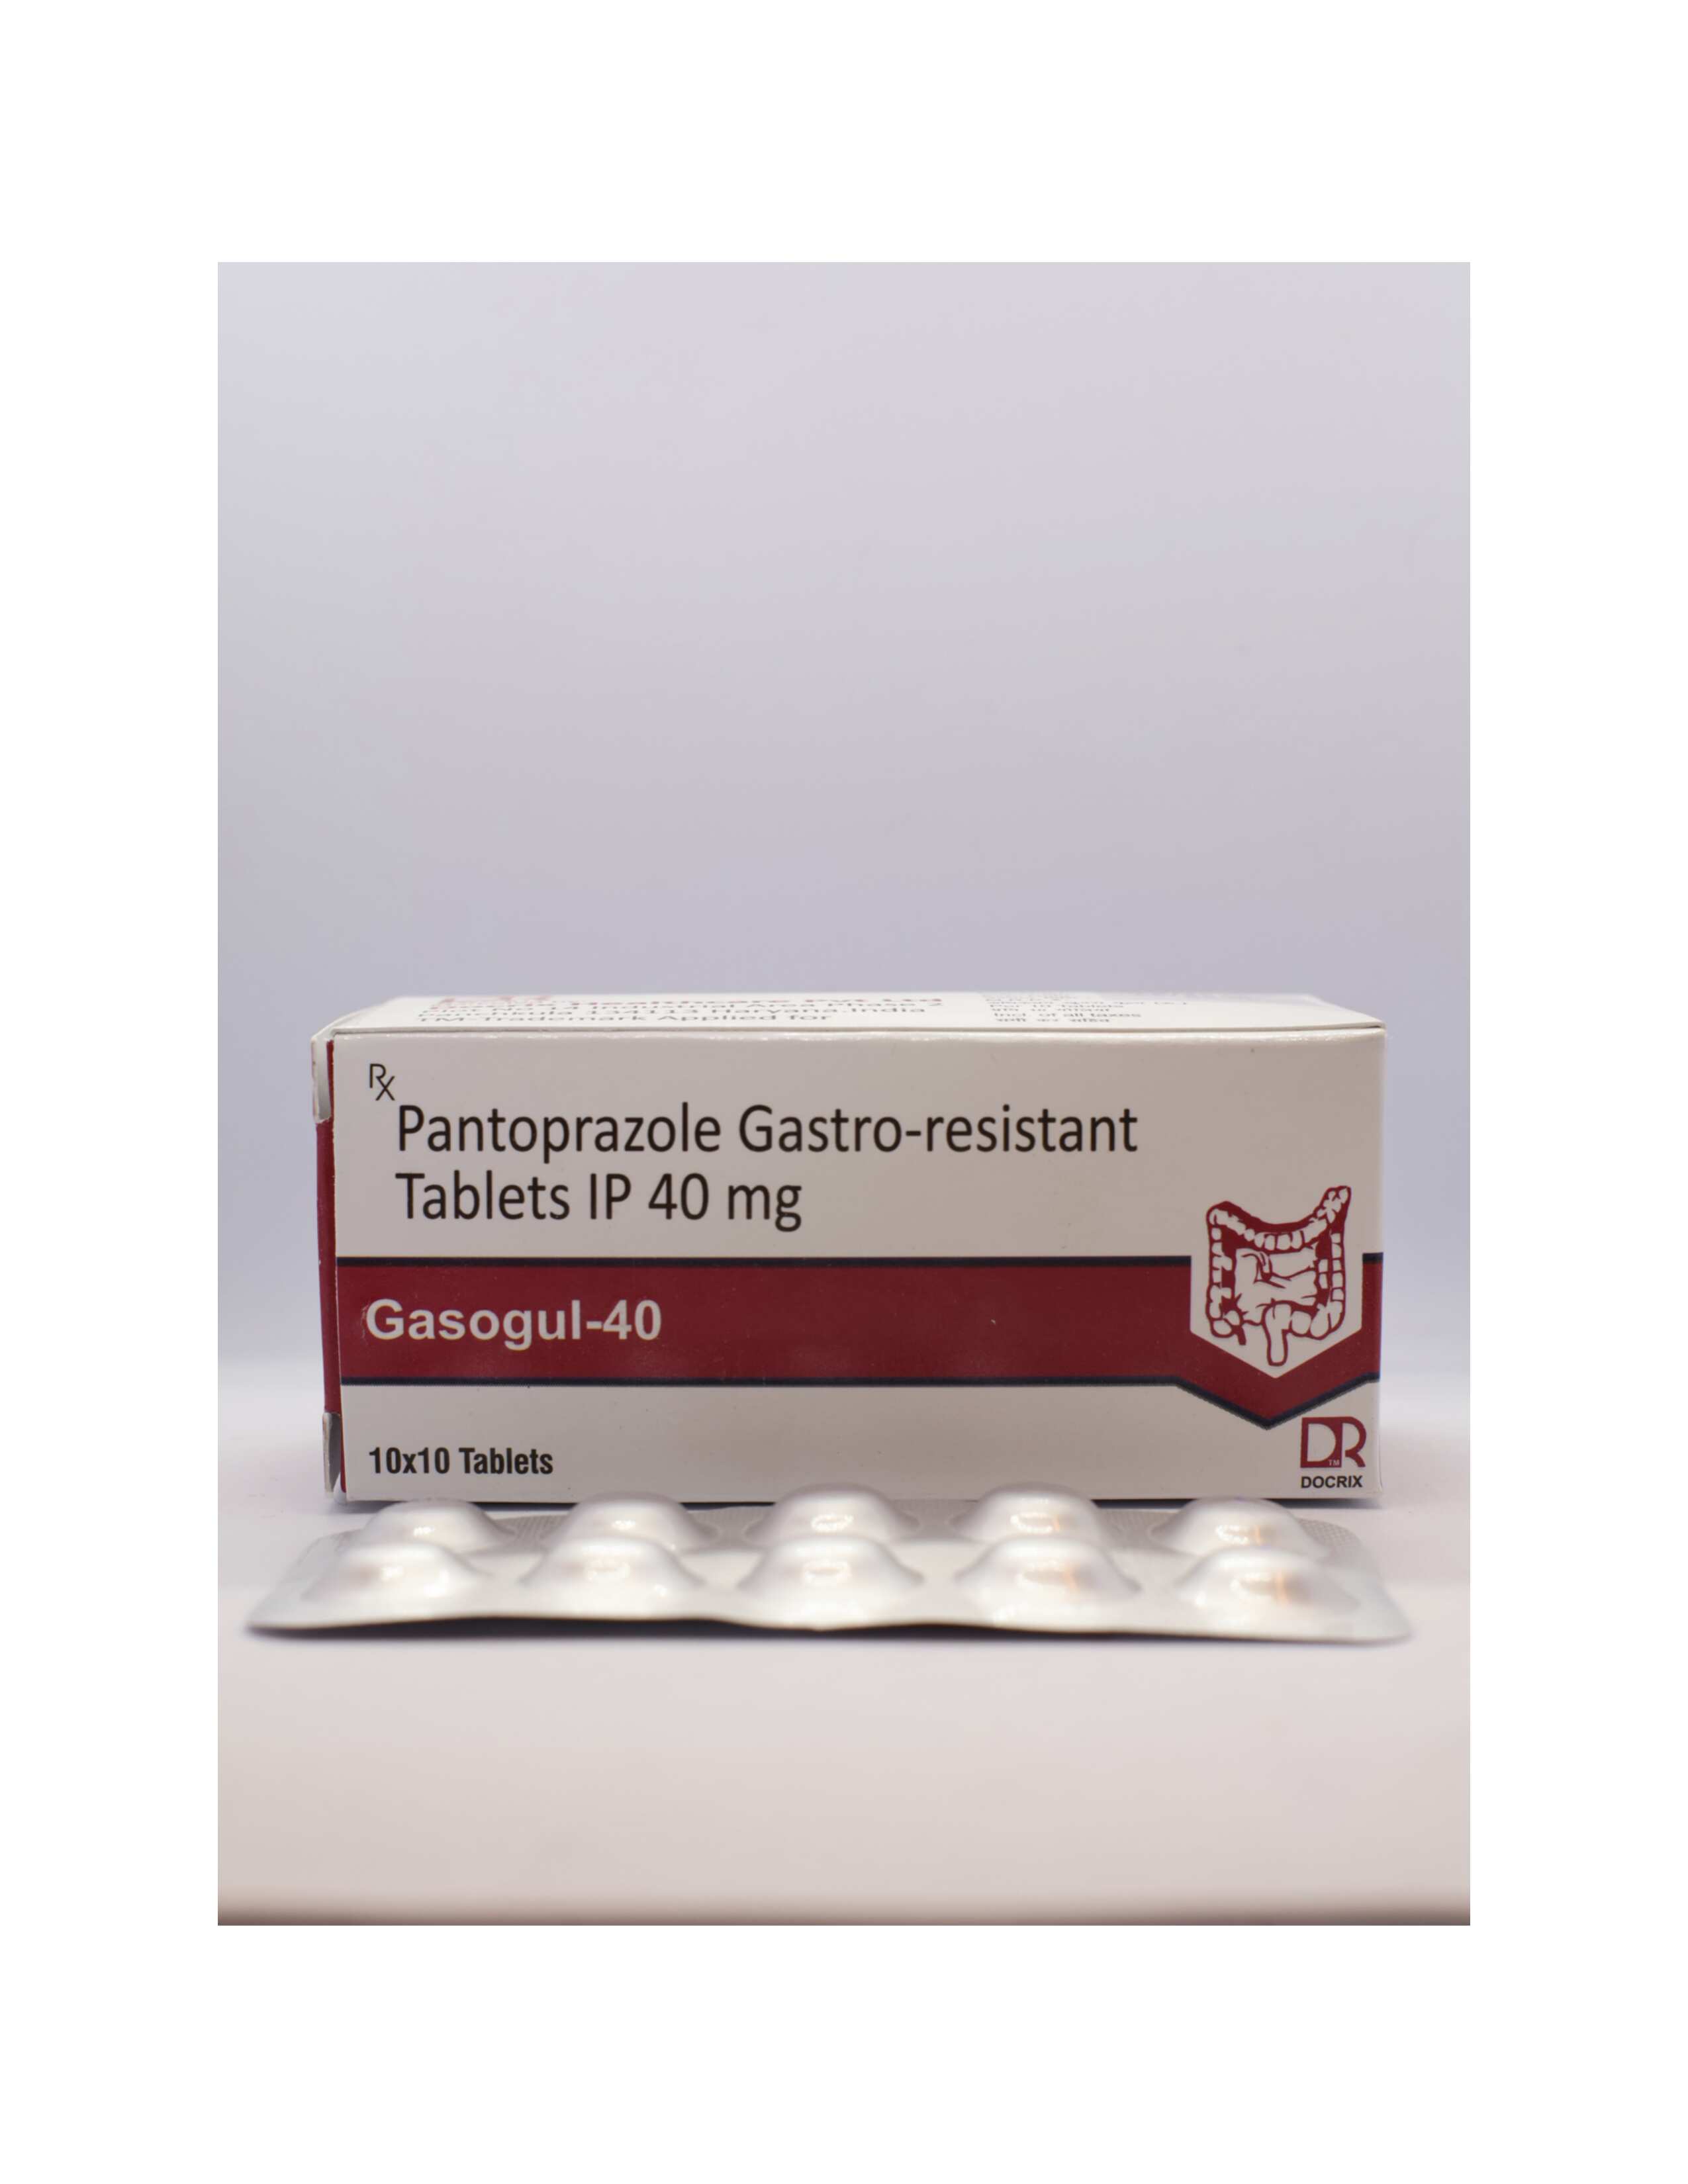 Product Name: Gasogul 40, Compositions of Gasogul 40 are Pantoprazole Gastro-resistant Tablets IP 40 mg - Docrix Healthcare